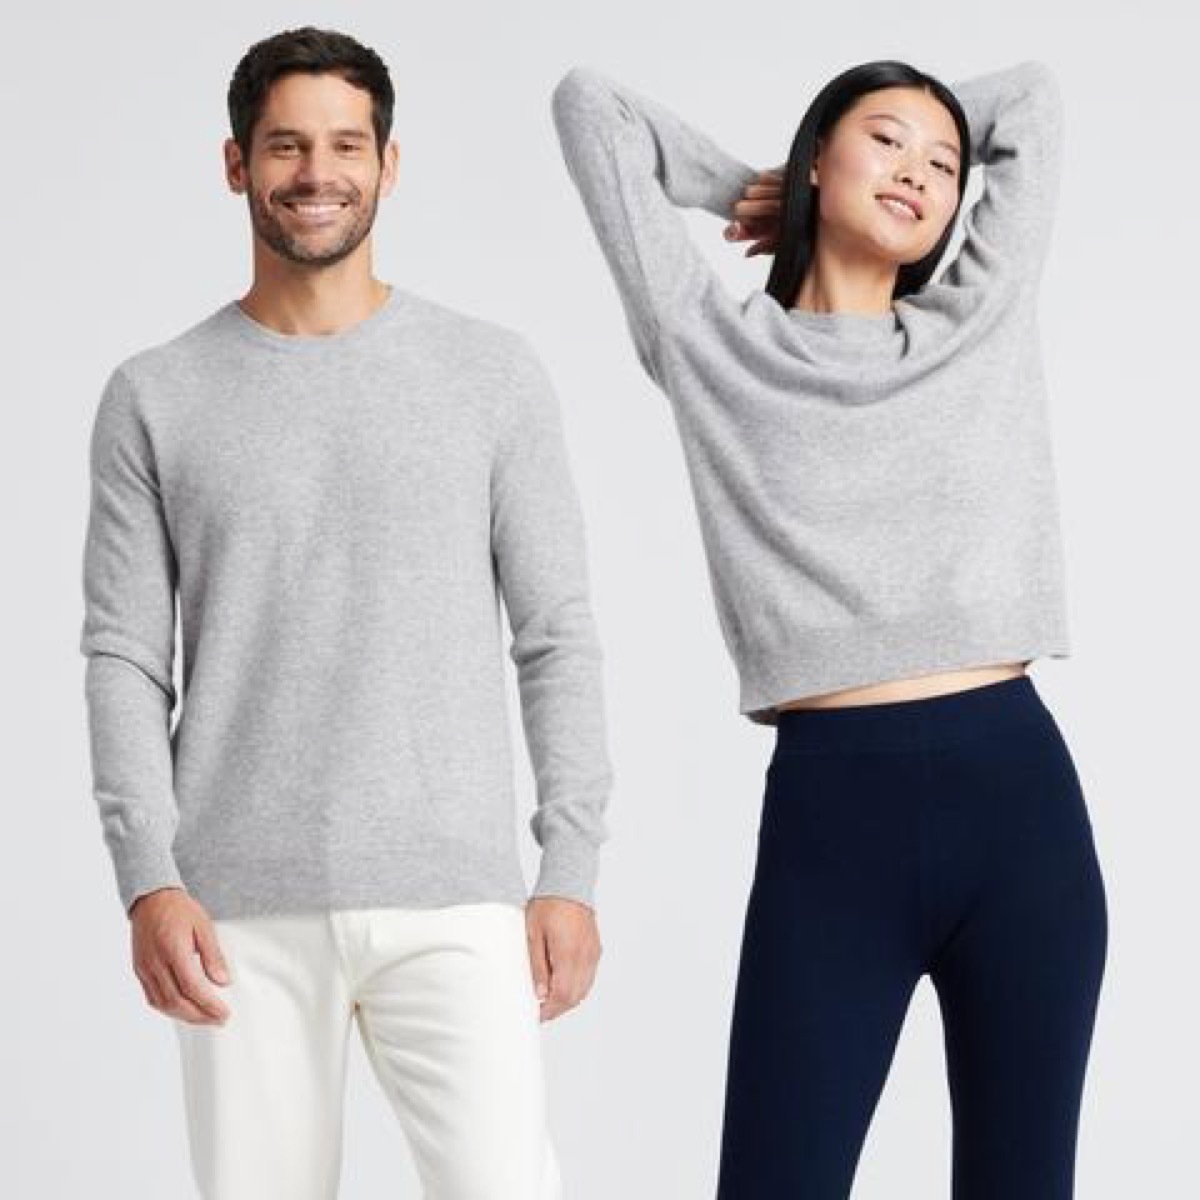 man and woman wearing gray cashmere sweaters